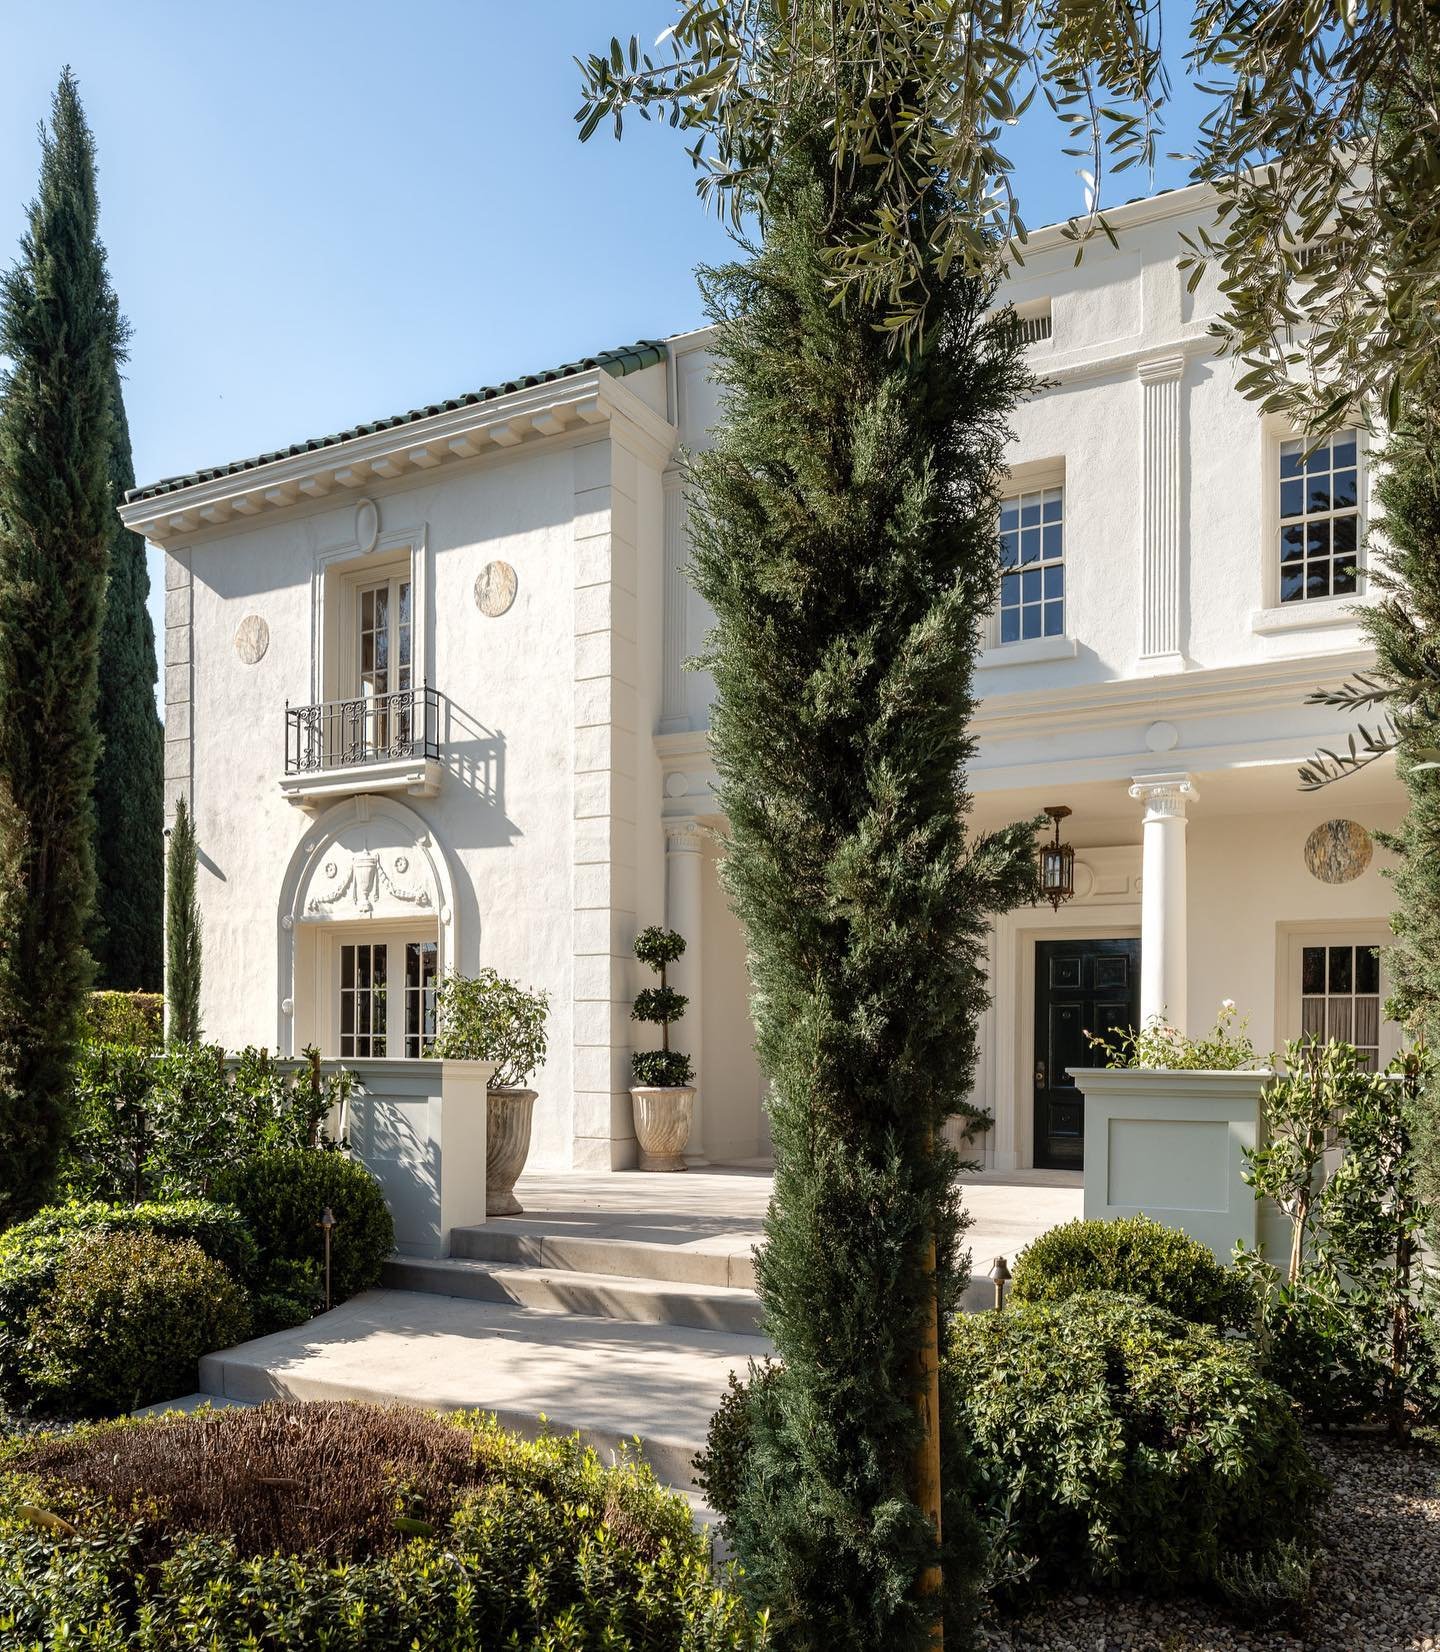 Francis York Beautifully Renovated Historic House in Los Angeles Hits the Market for $20,000,000 15.jpeg